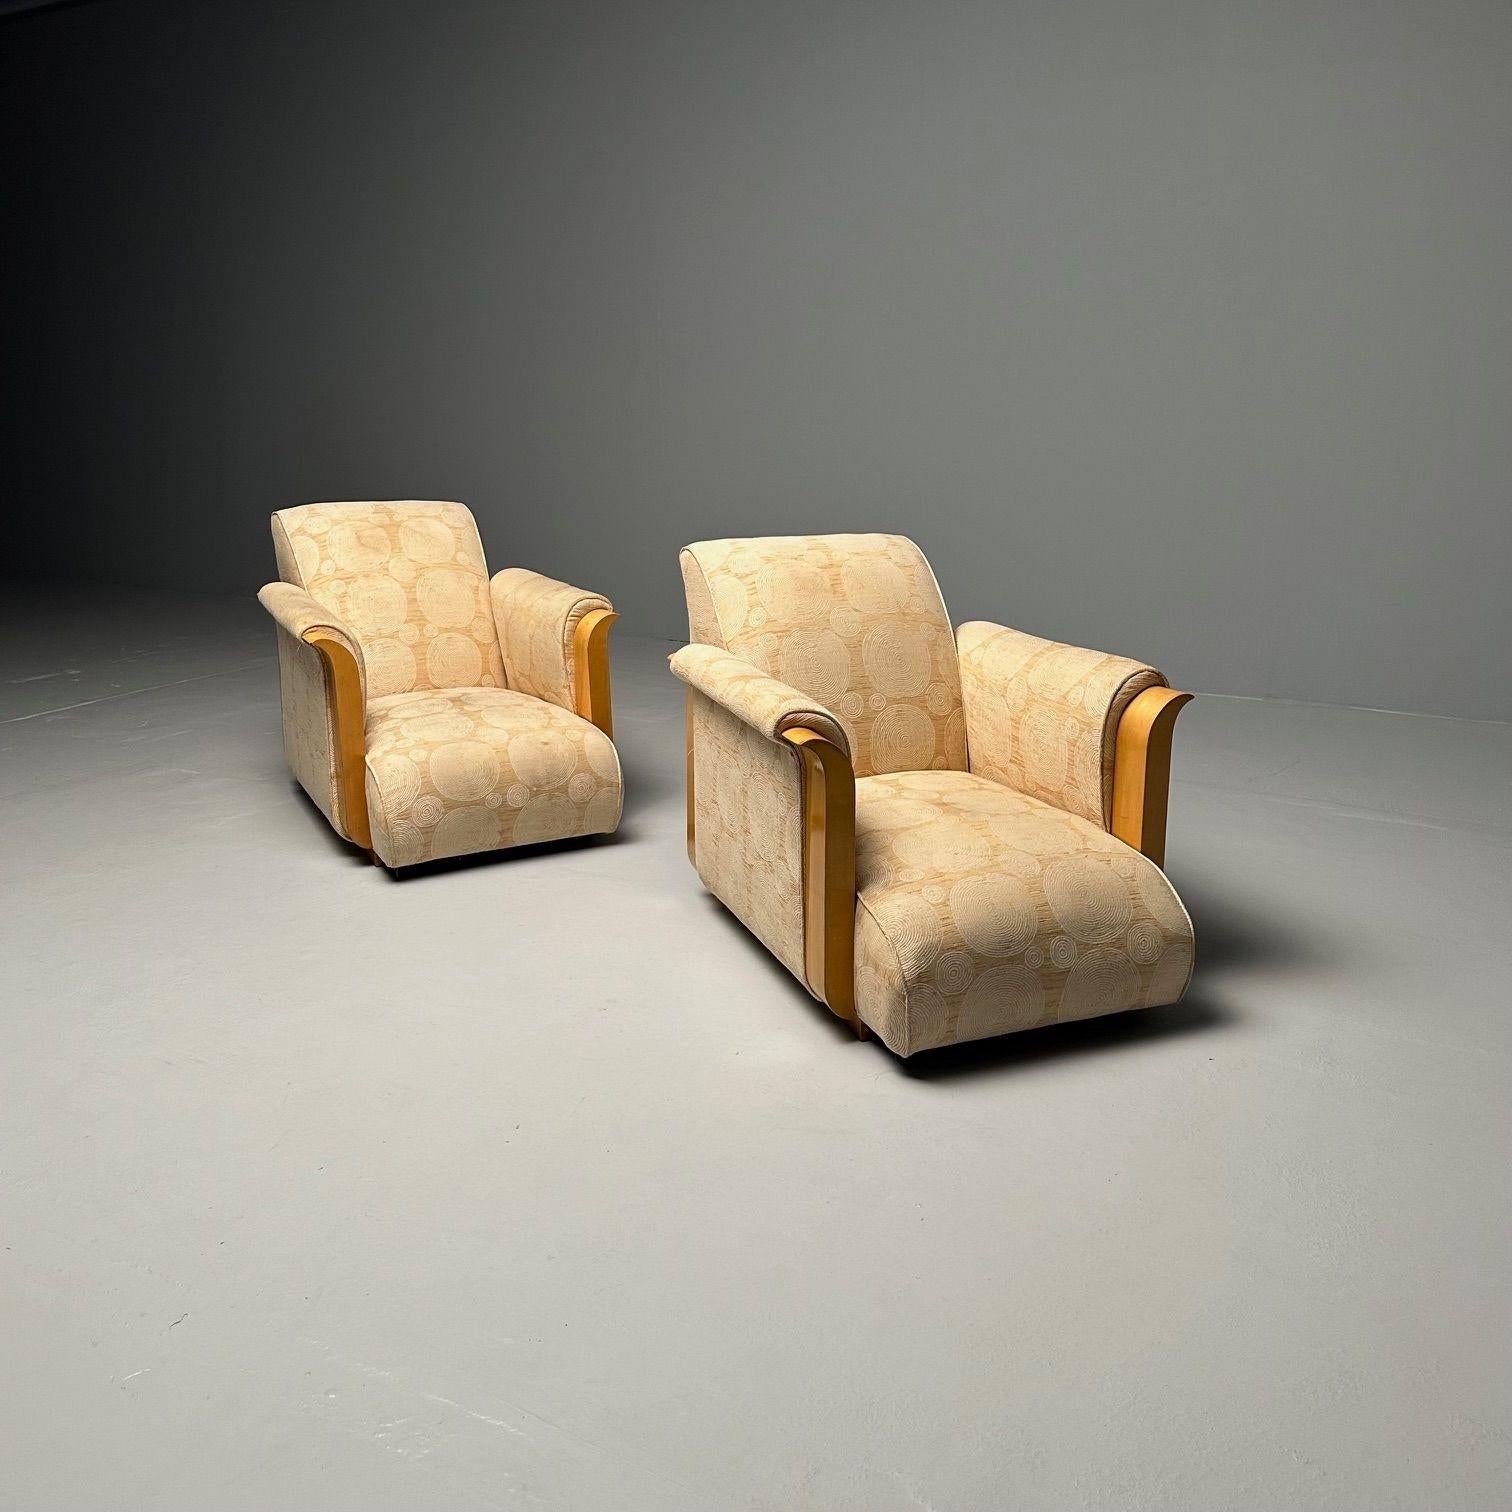 Rare Pair of French Art Deco Lounge Chairs by Michel Dufet, France, 1930s For Sale 5